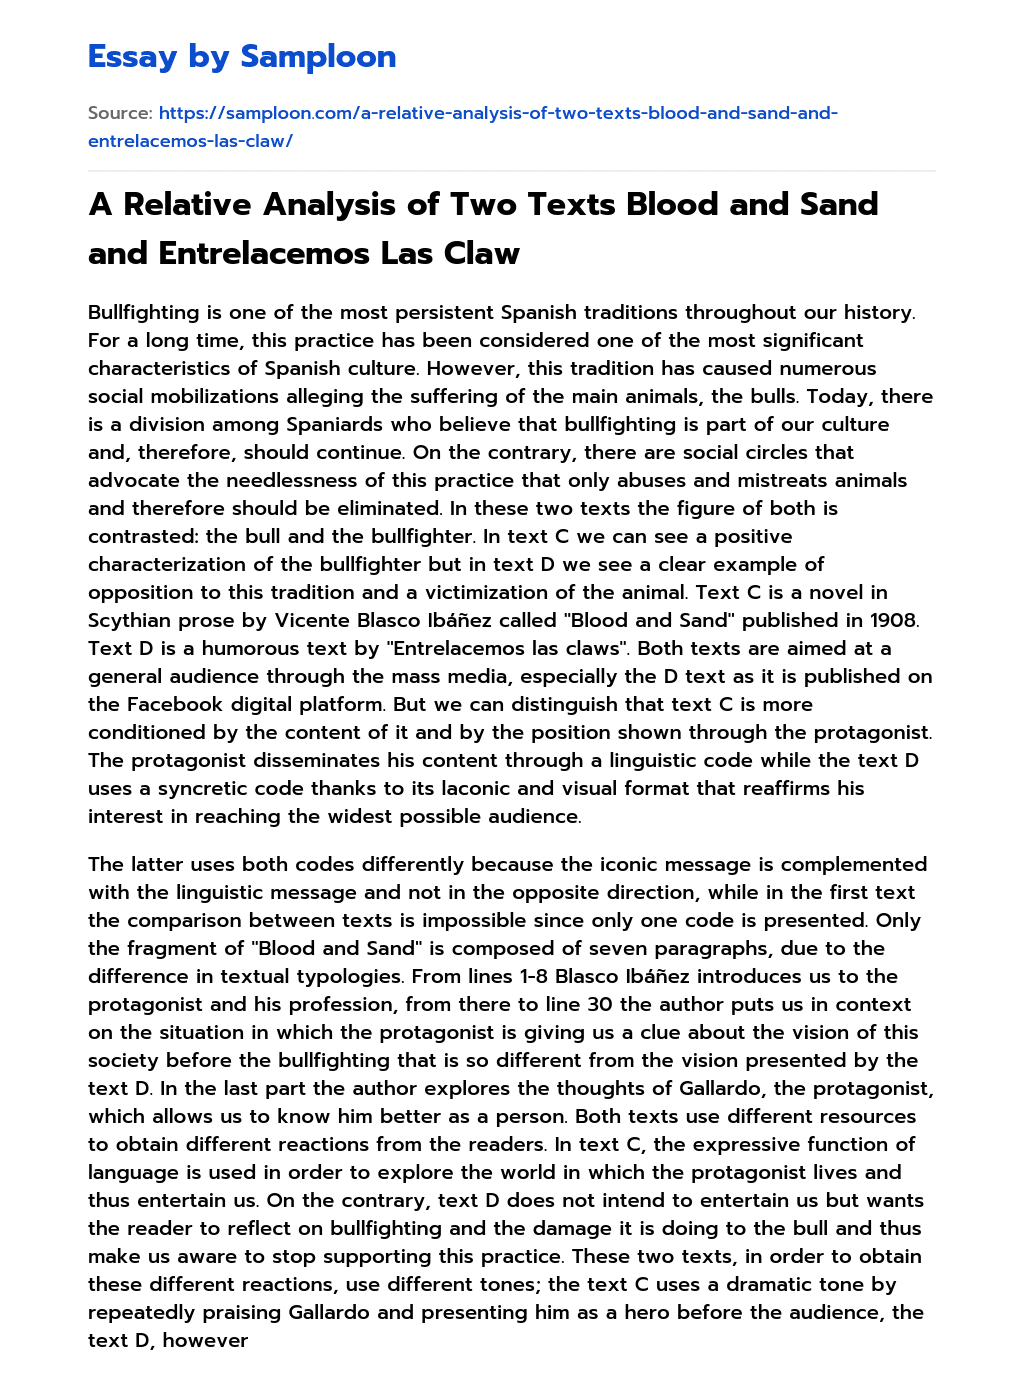 A Relative Analysis of Two Texts Blood and Sand and Entrelacemos Las Claw essay